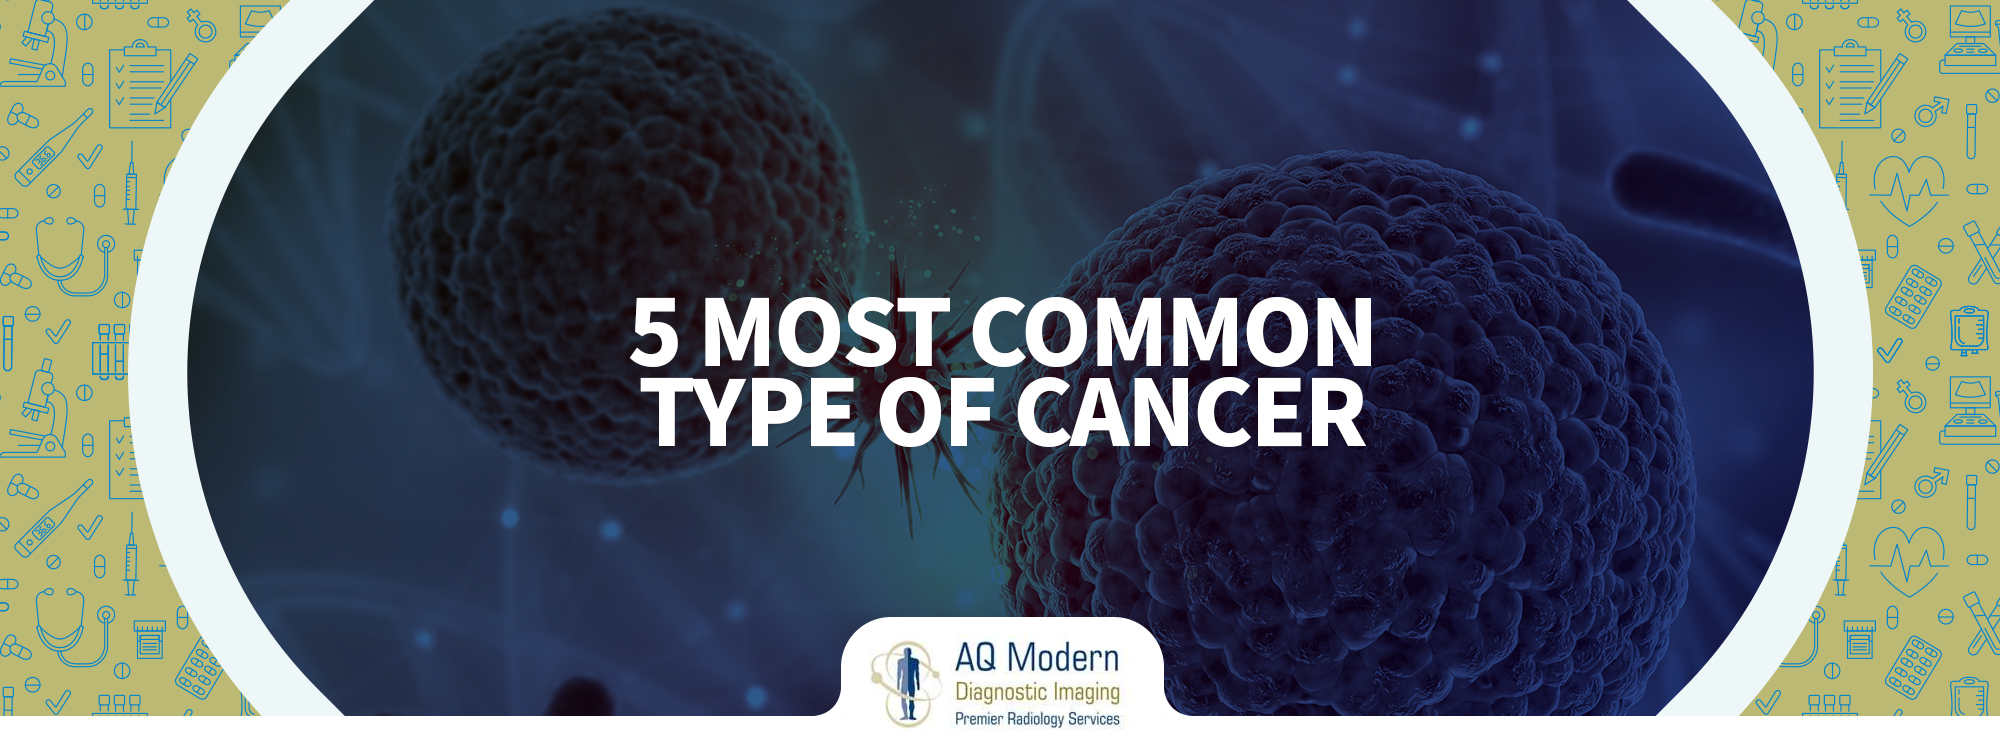 Most Common Type of Cancer